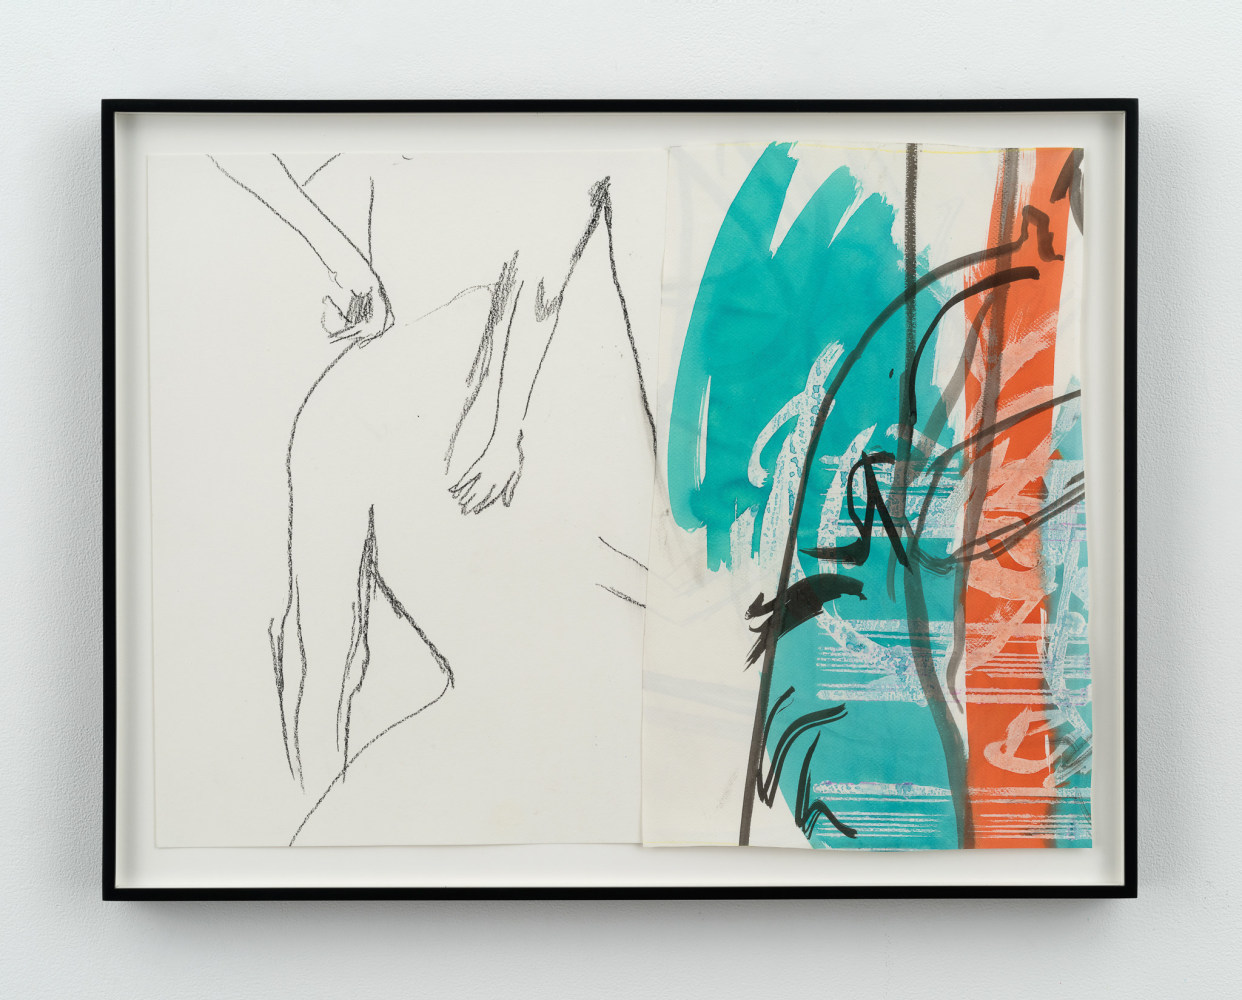 Nick Mauss
Untitled
2020
Pencil, ink and watercolor on paper
18 1/4 x 24 1/4 inches (46.4 x 61.6 cm)
20 5/8 x 26 5/8 inches (52.4 x 67.6 cm) framed
Signed verso
NM 794

&amp;nbsp;

INQUIRE